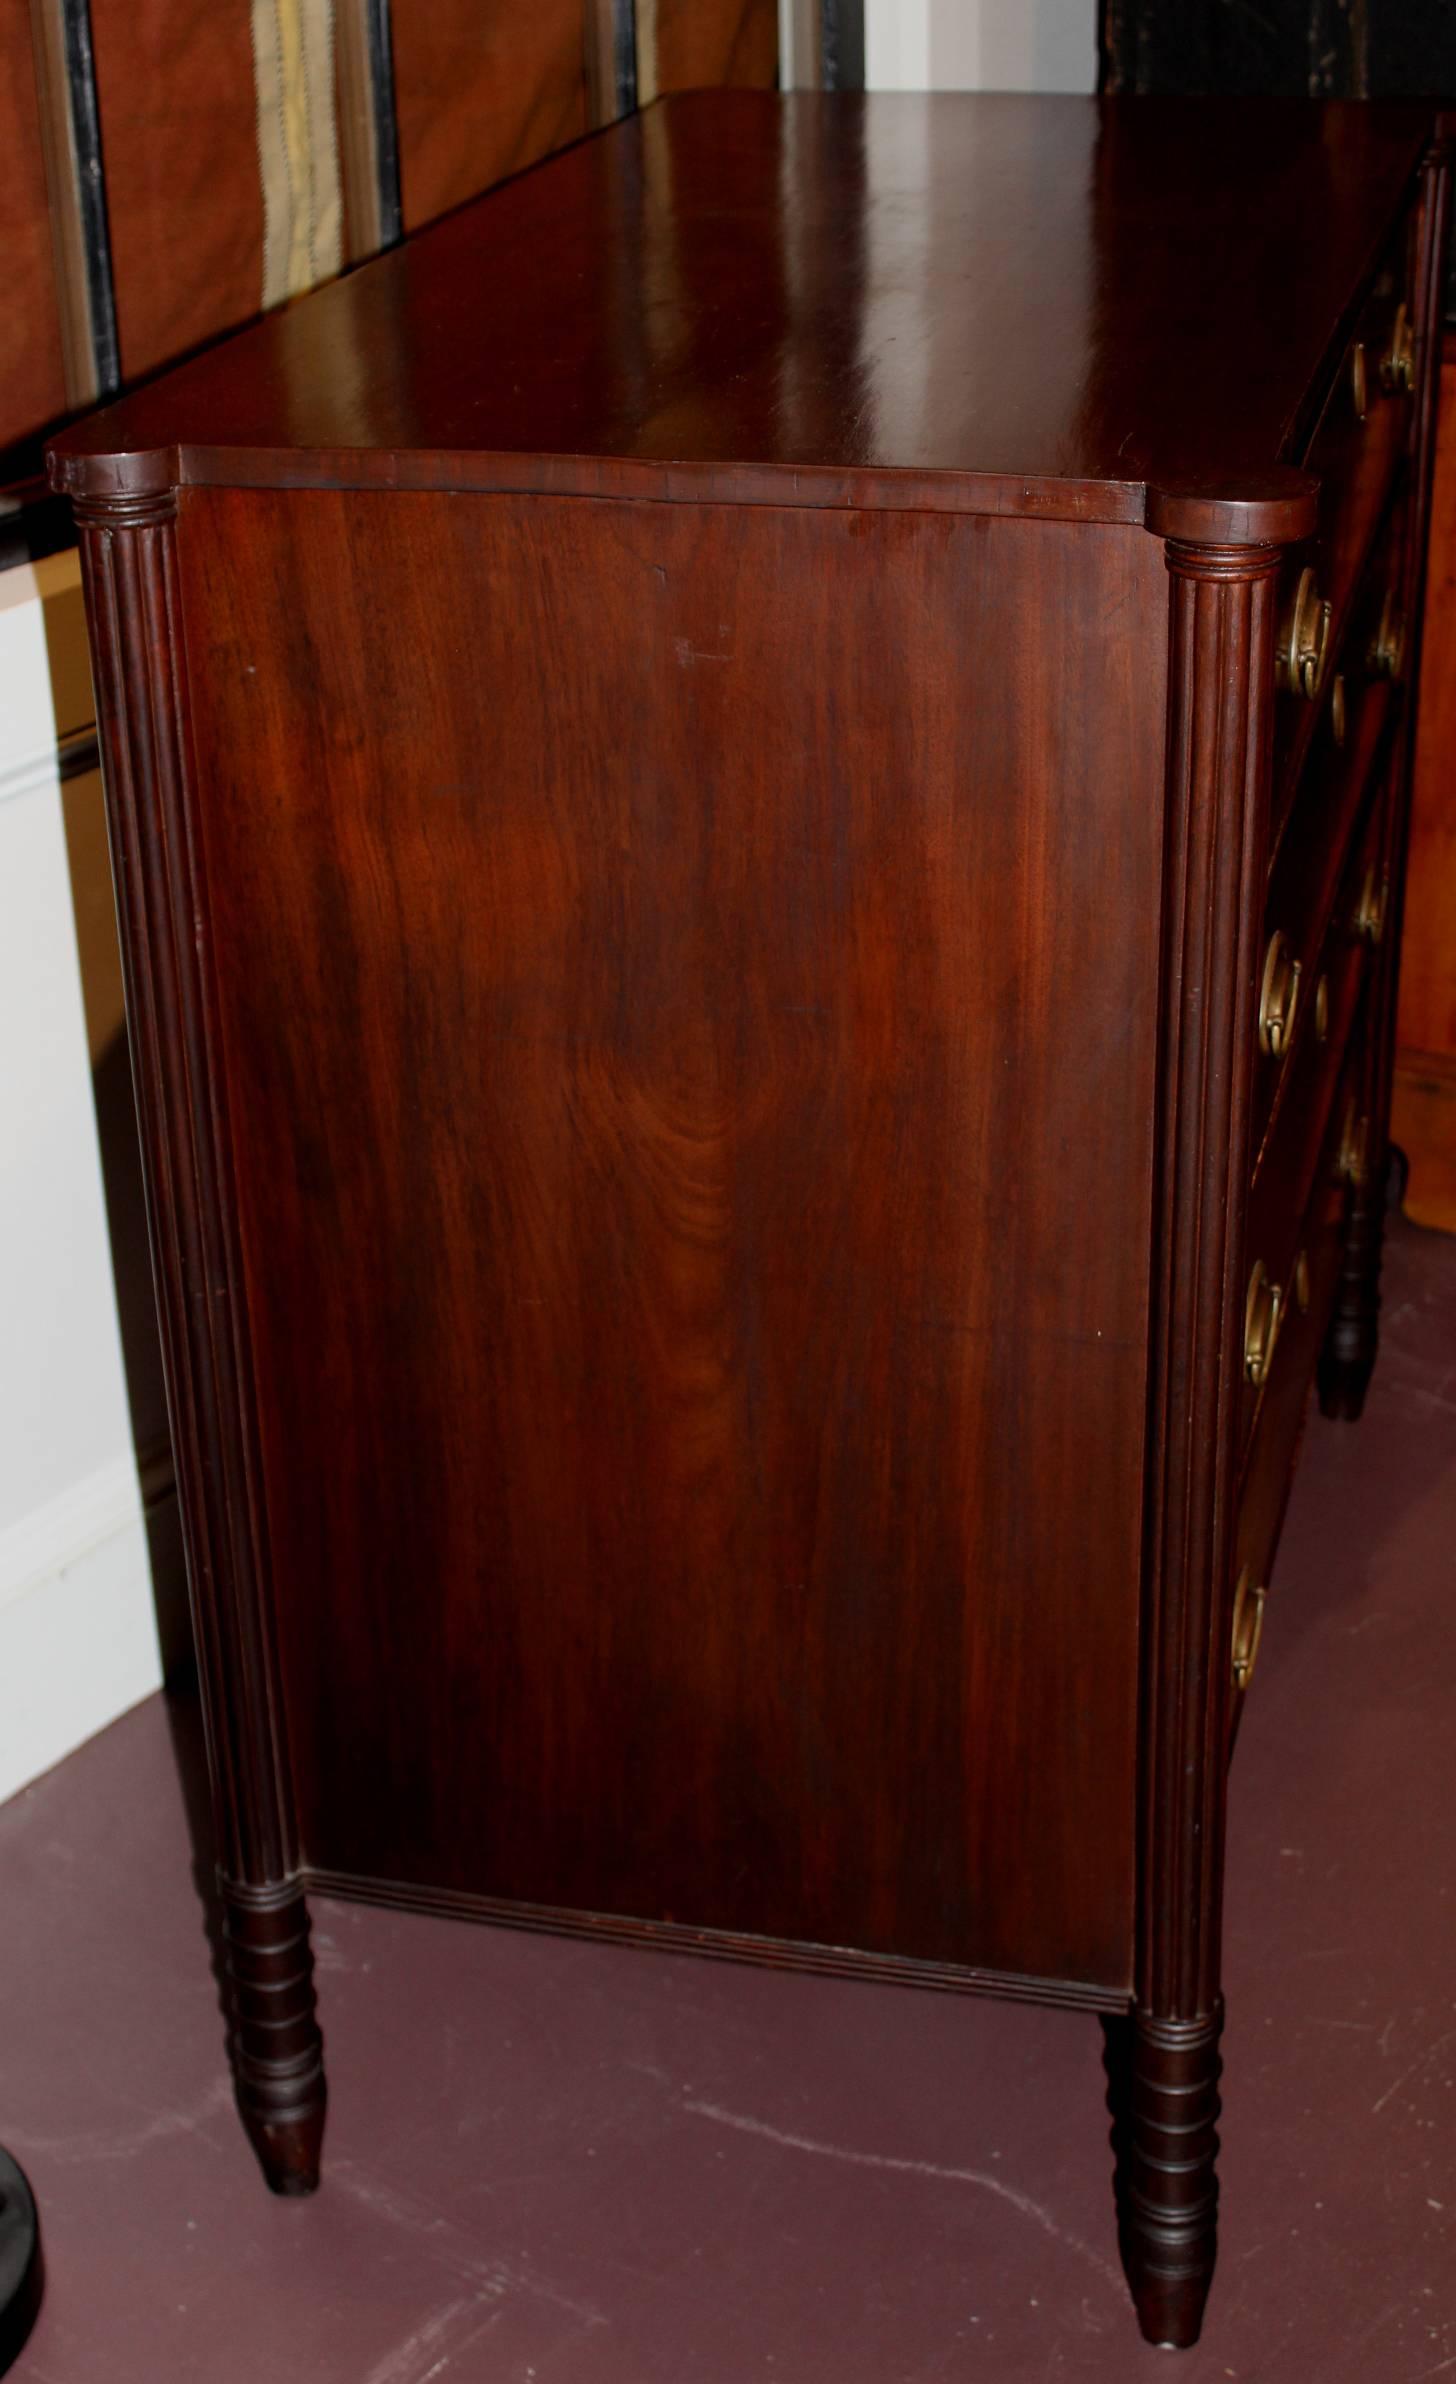 An American Sheraton mahogany four-drawer chest, circa 1820 with four crossbanded and beaded drawers with rectangular top with ovolu corners above receded pilasters over turned and tapered legs. Probably of Massachusetts origin. Nice brass hardware.